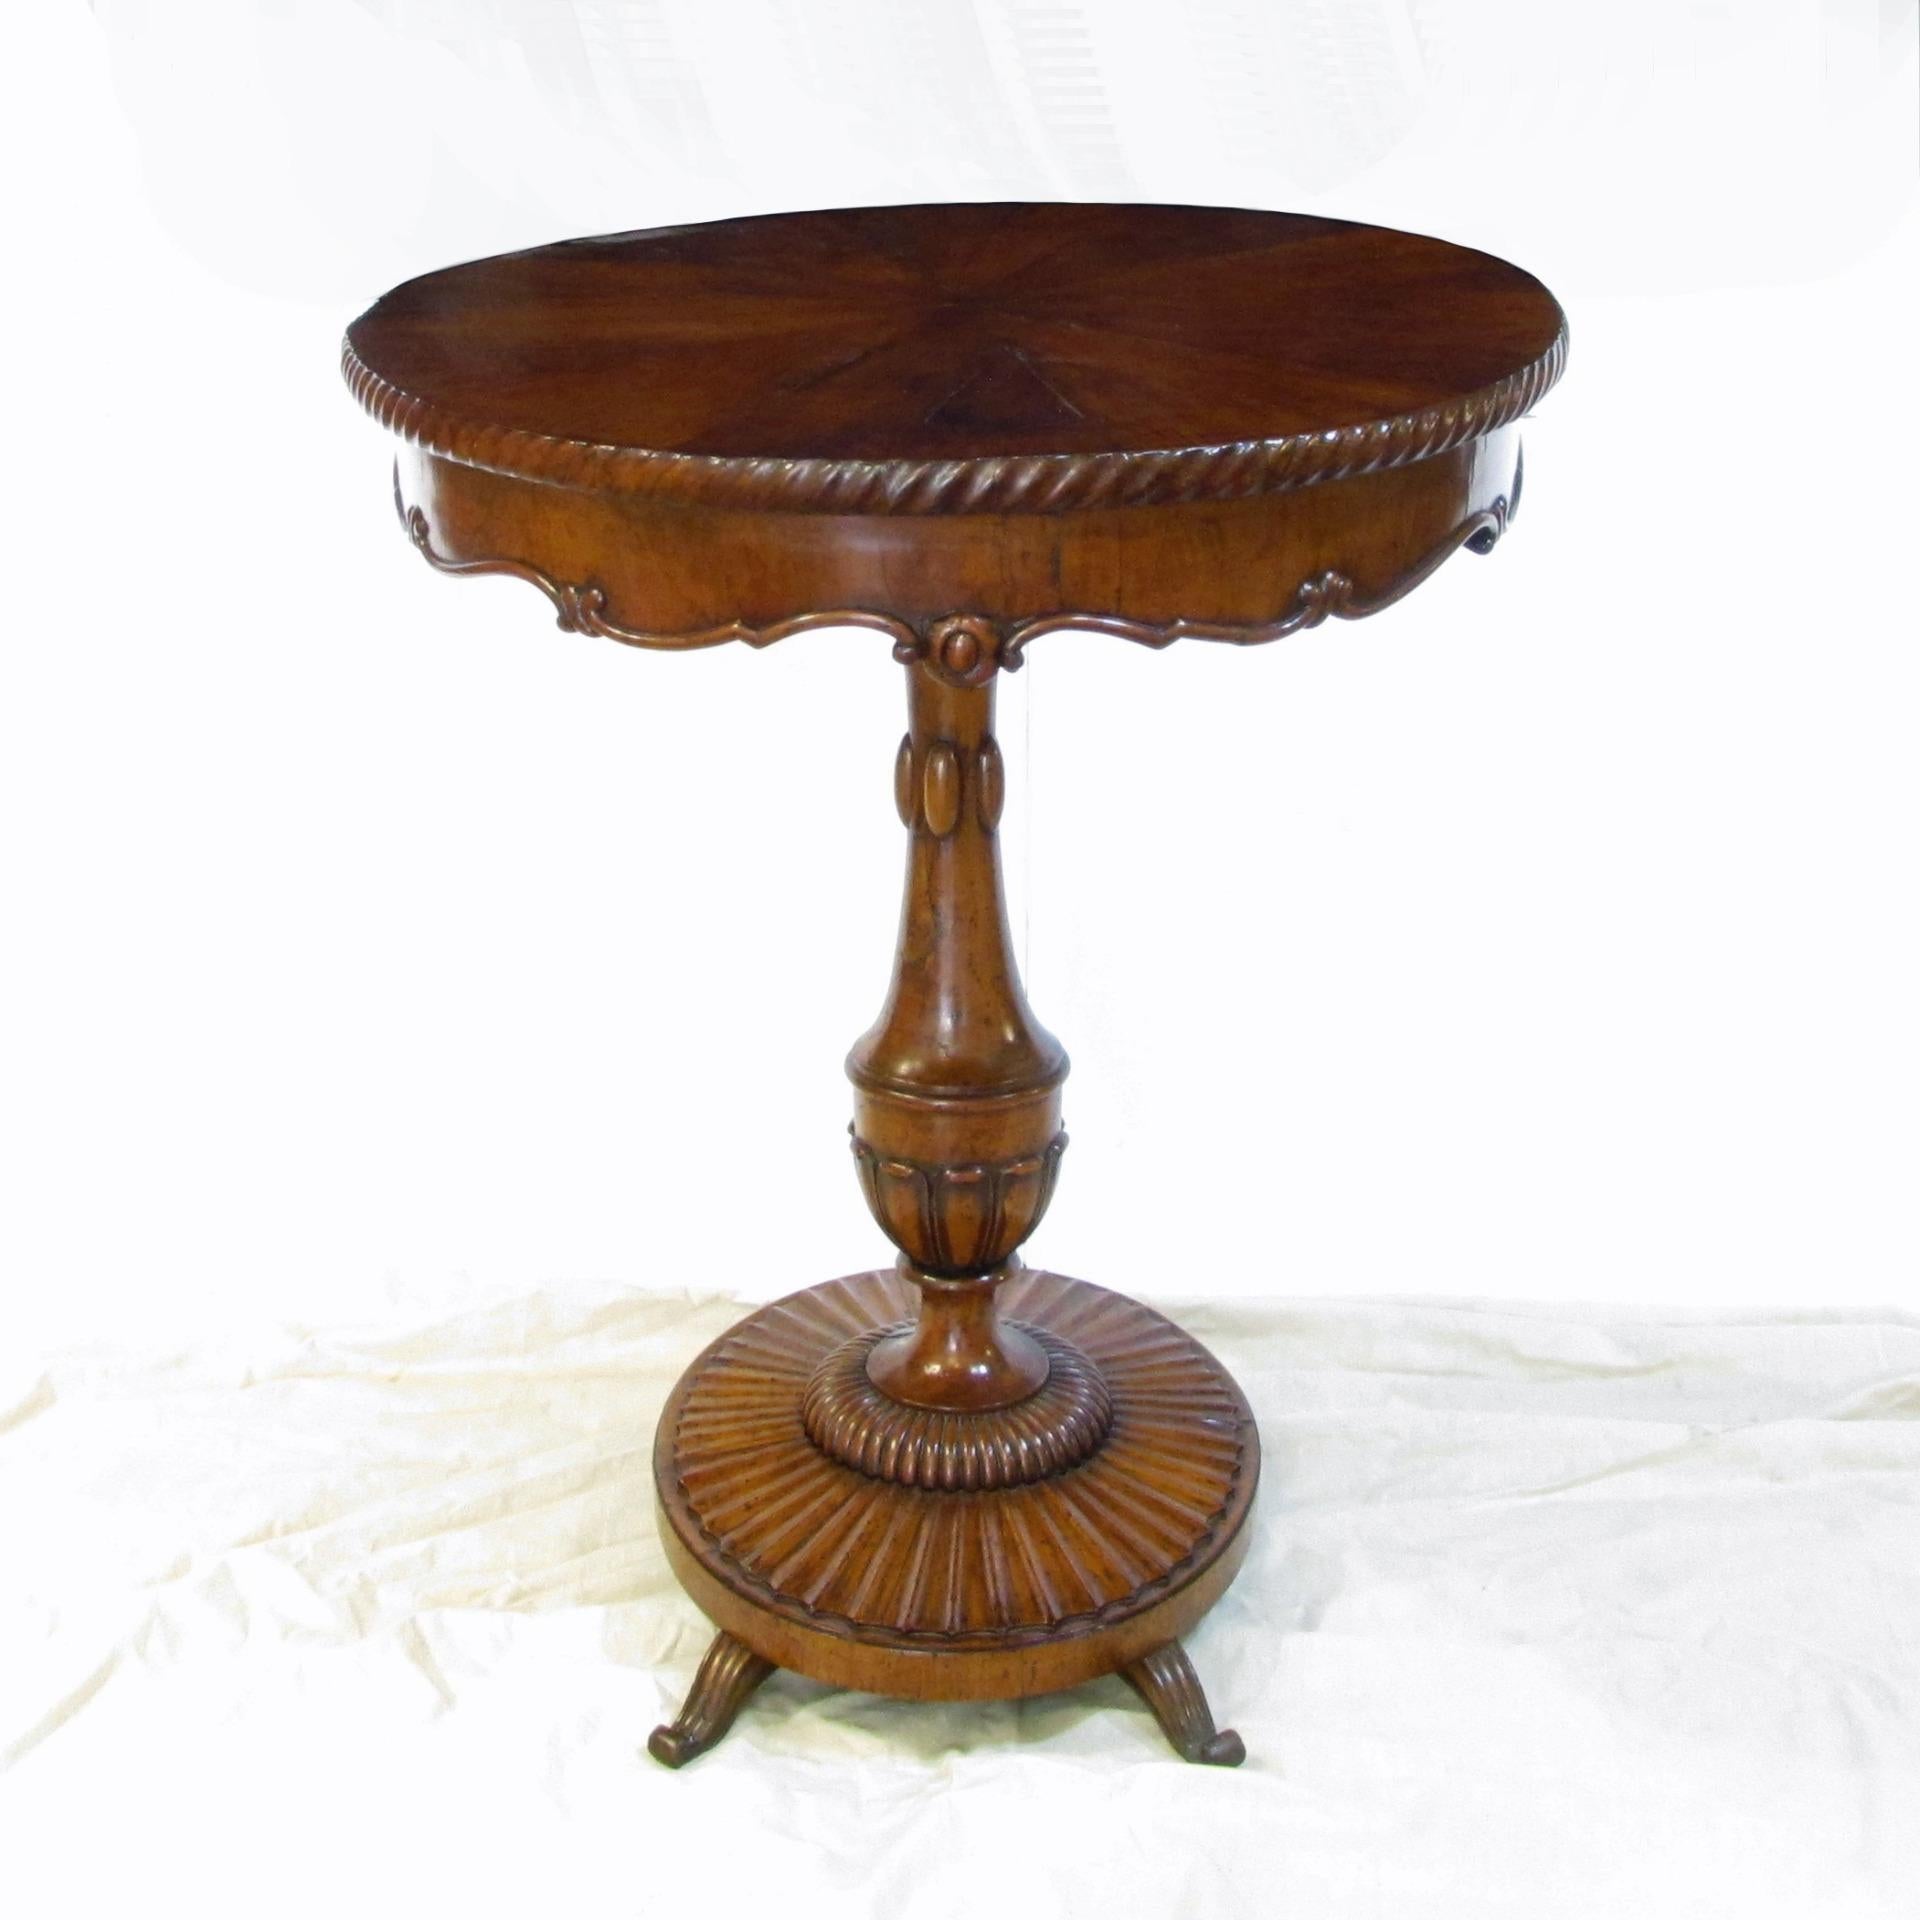 Elegant and refined, this coffee table was probably designed by the architect Agostino Fantastici, known in Italy for creating the most prestigious furniture of the Tuscan nobility between the end of the 18th and the first half of the 19th century.